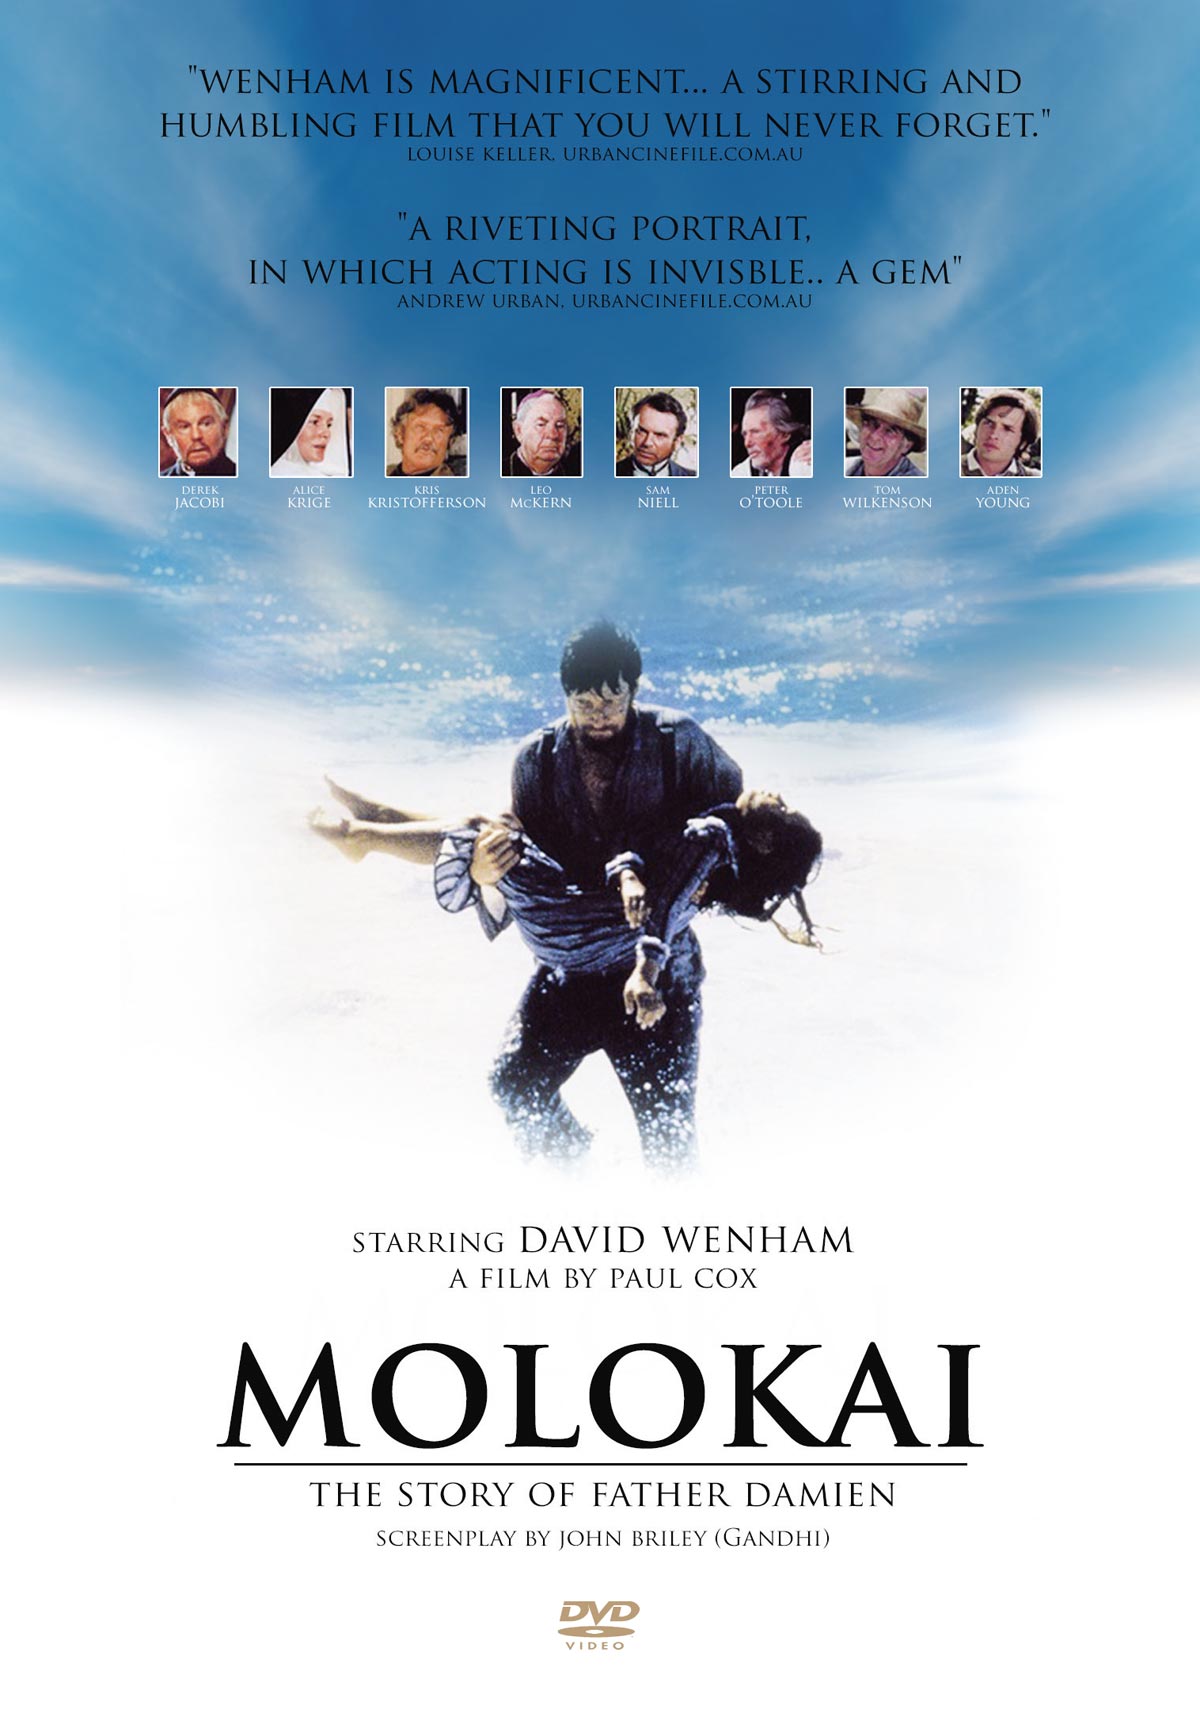 Molokai - The story of father Damien